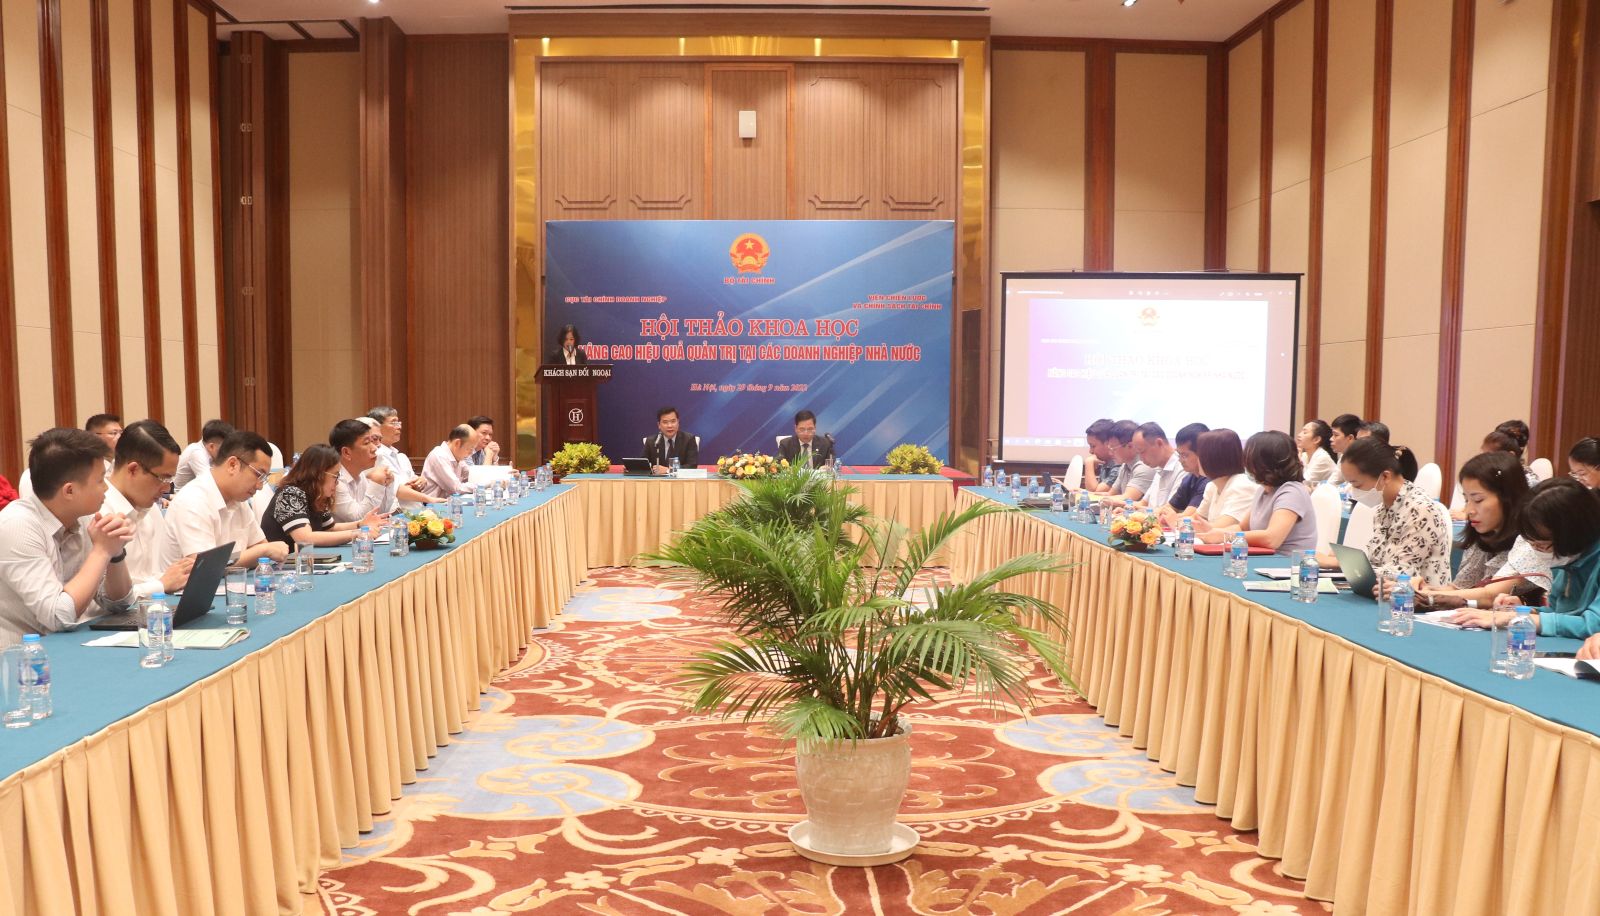 https://mof.gov.vn/acms/ckfinder/nguyenhuutho/images/Toan%20canh%20chinh.JPG